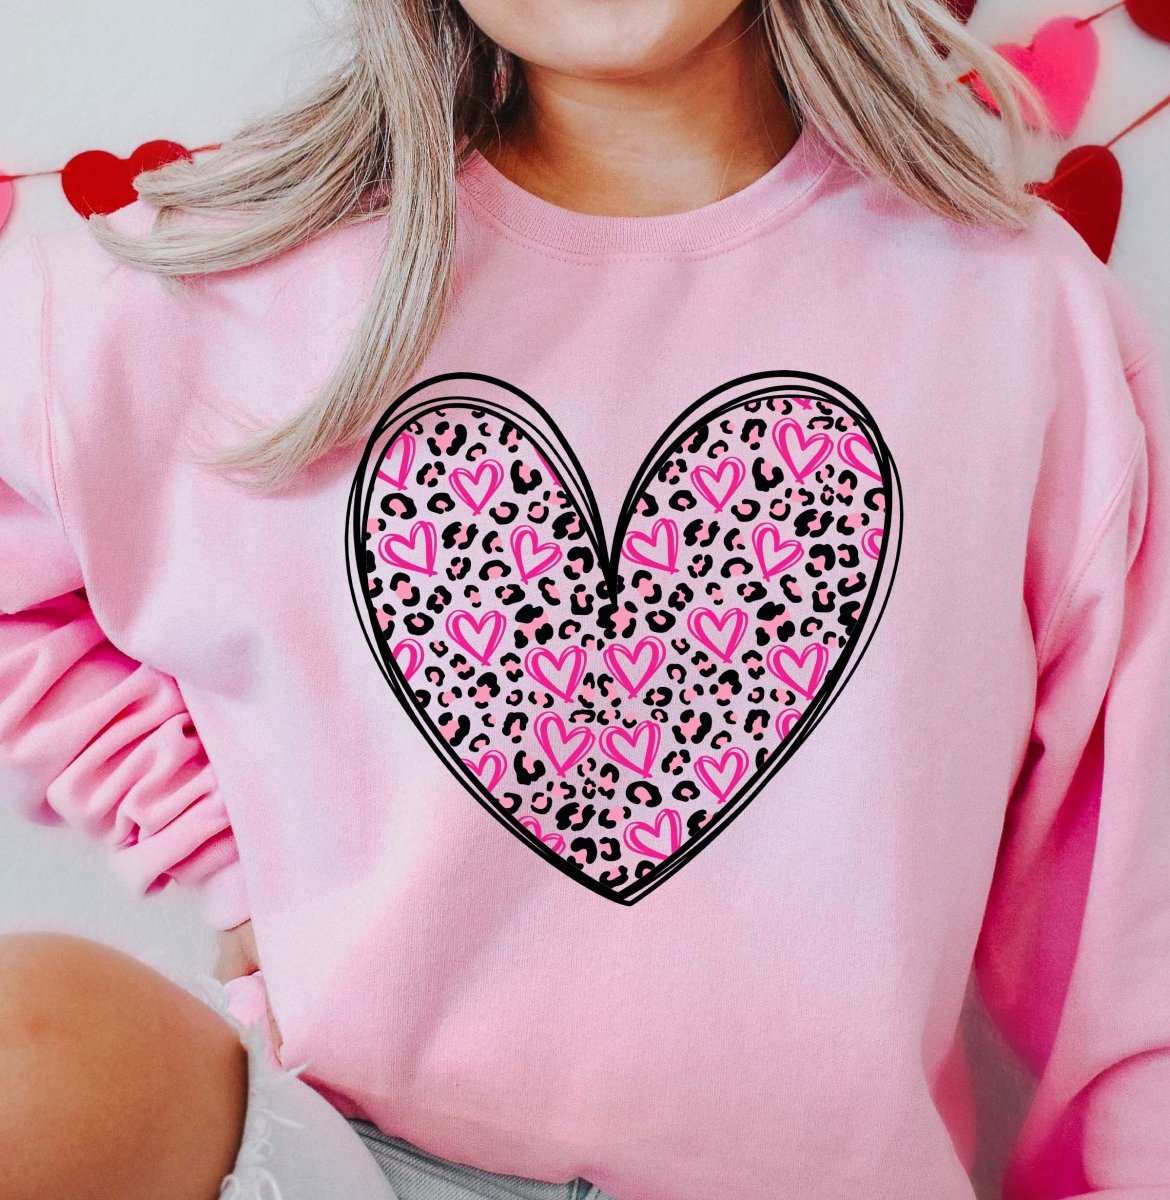 Leopard Hearts and More Hearts Crew Sweatshirt - Limeberry Designs